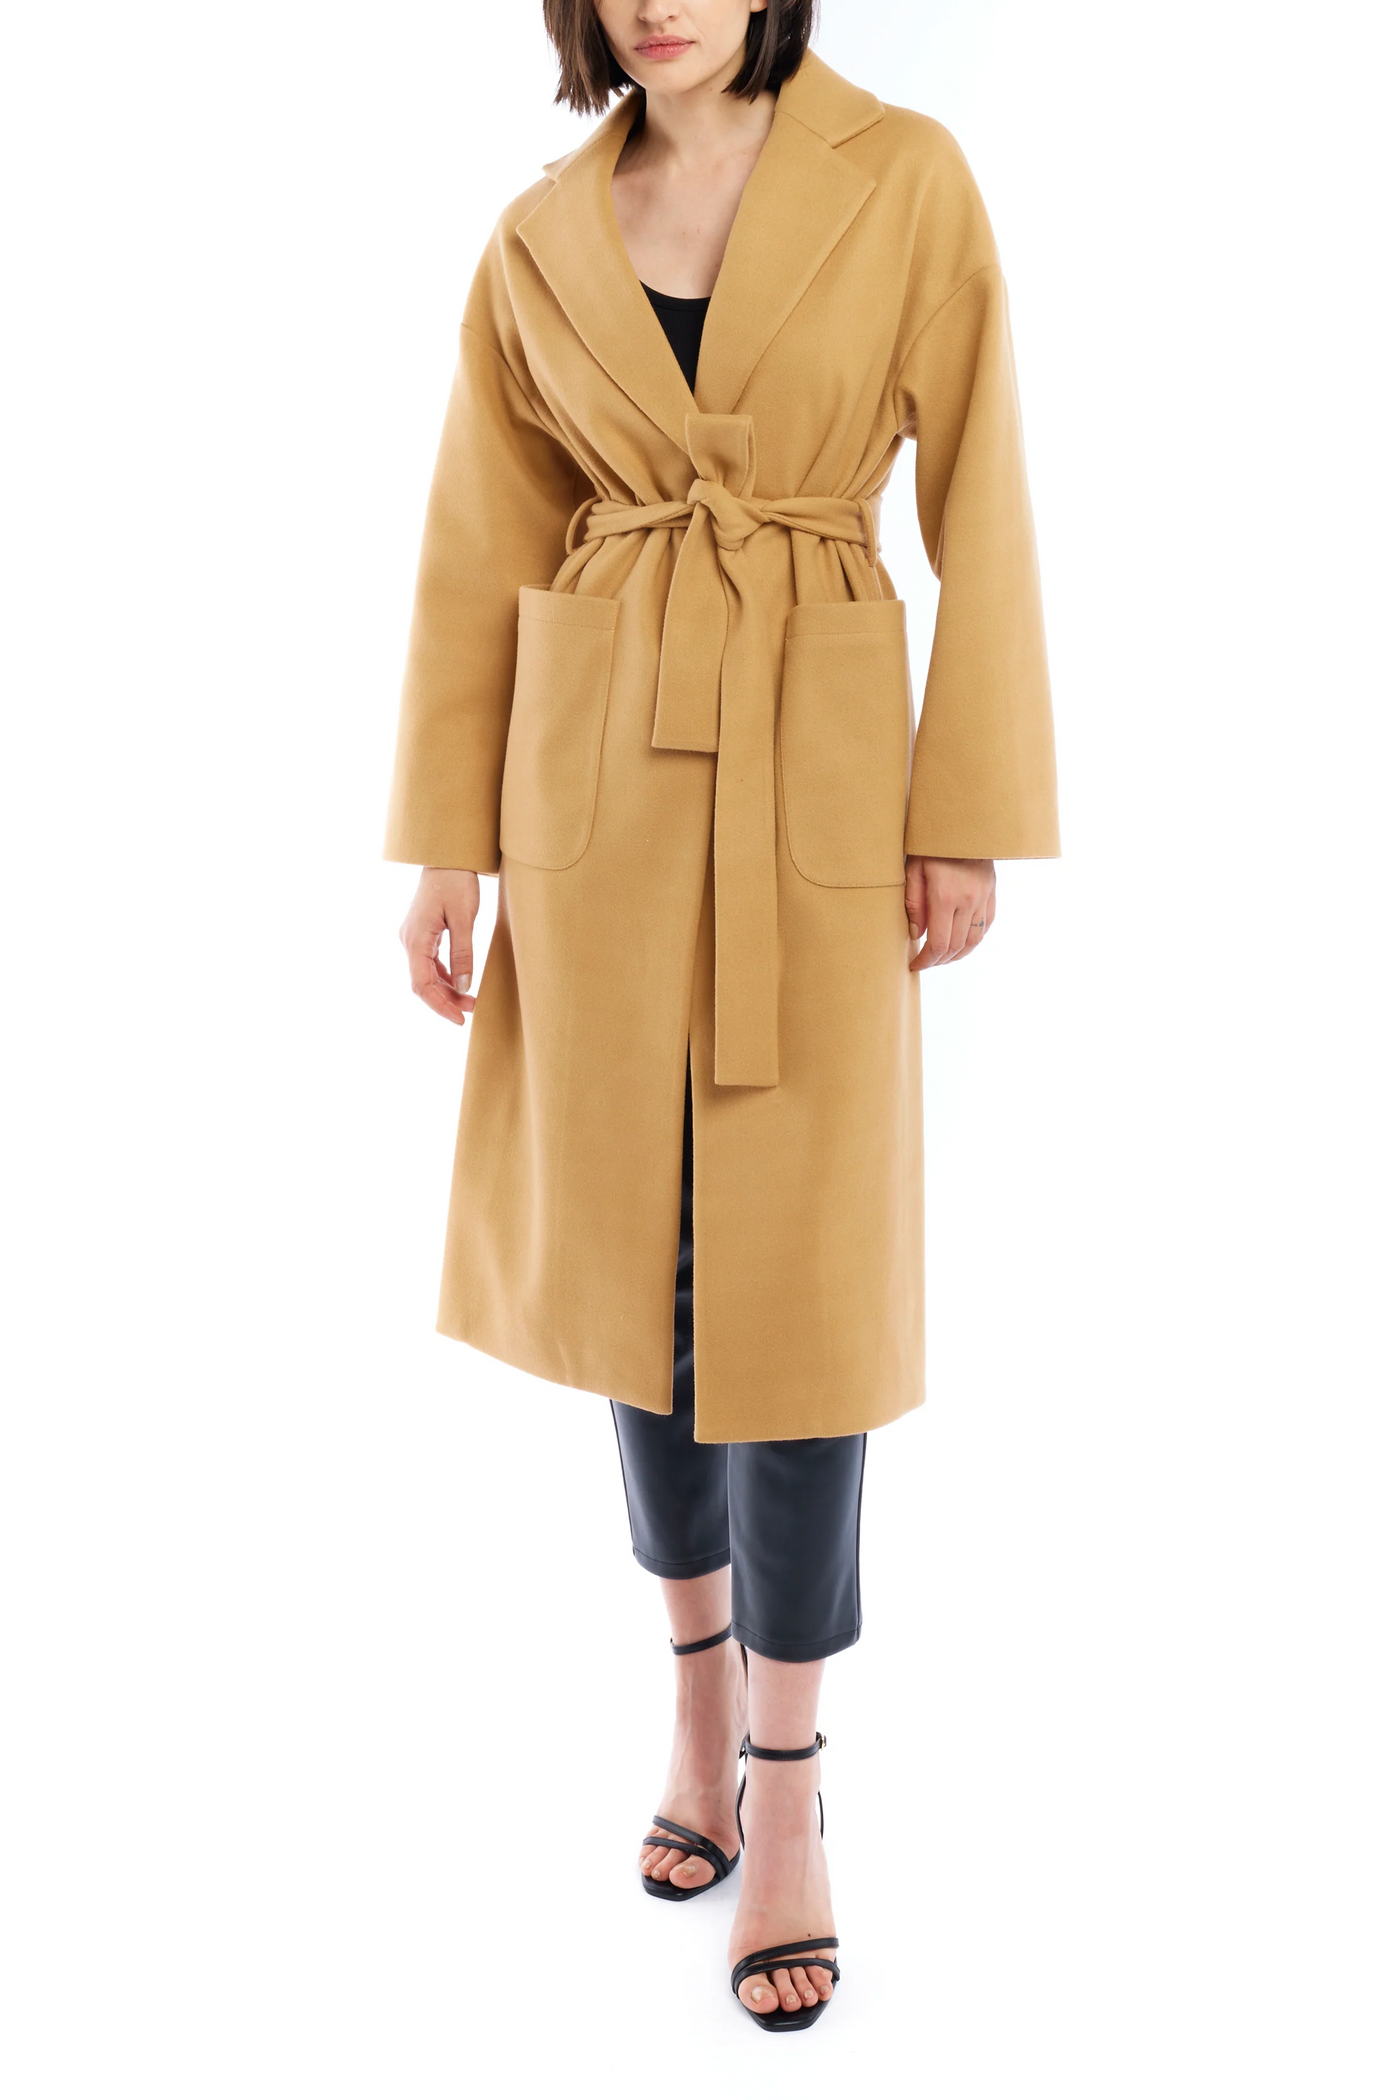 LBLC the Label:  Marie Tie Front Midi Length Trench Jacket